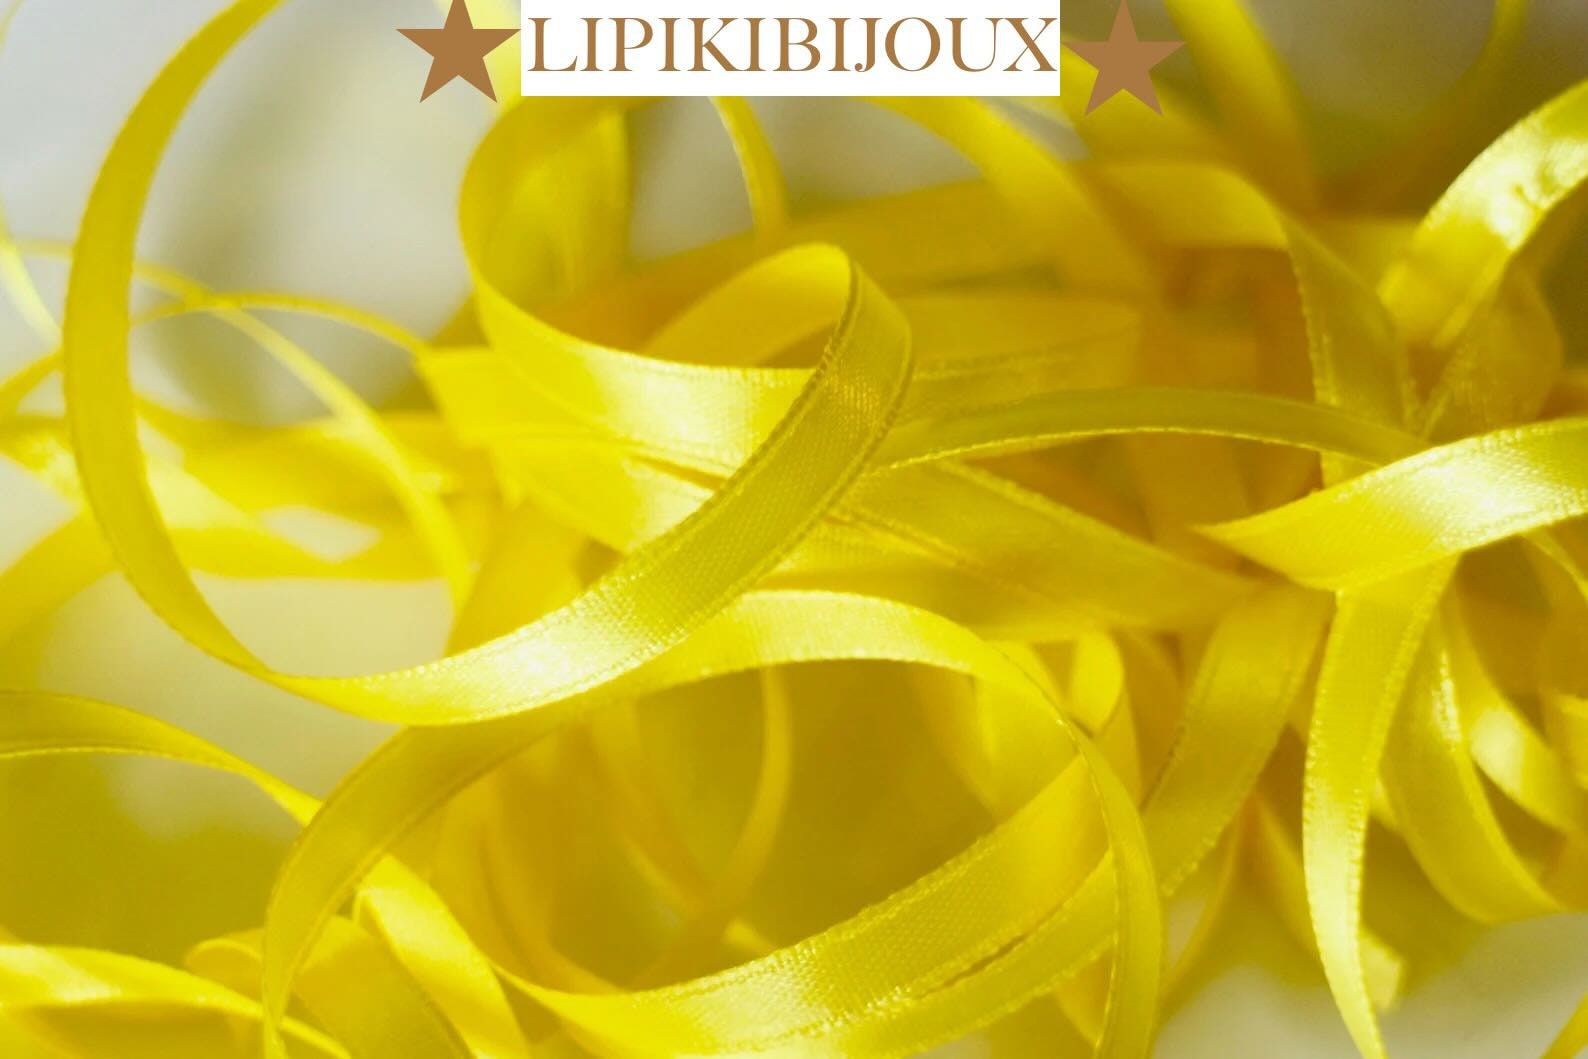 Luscious Double Faced Satin Ribbon Holiday Decorating Yellow Gold and White  2 Wide by 3 Yard Length 